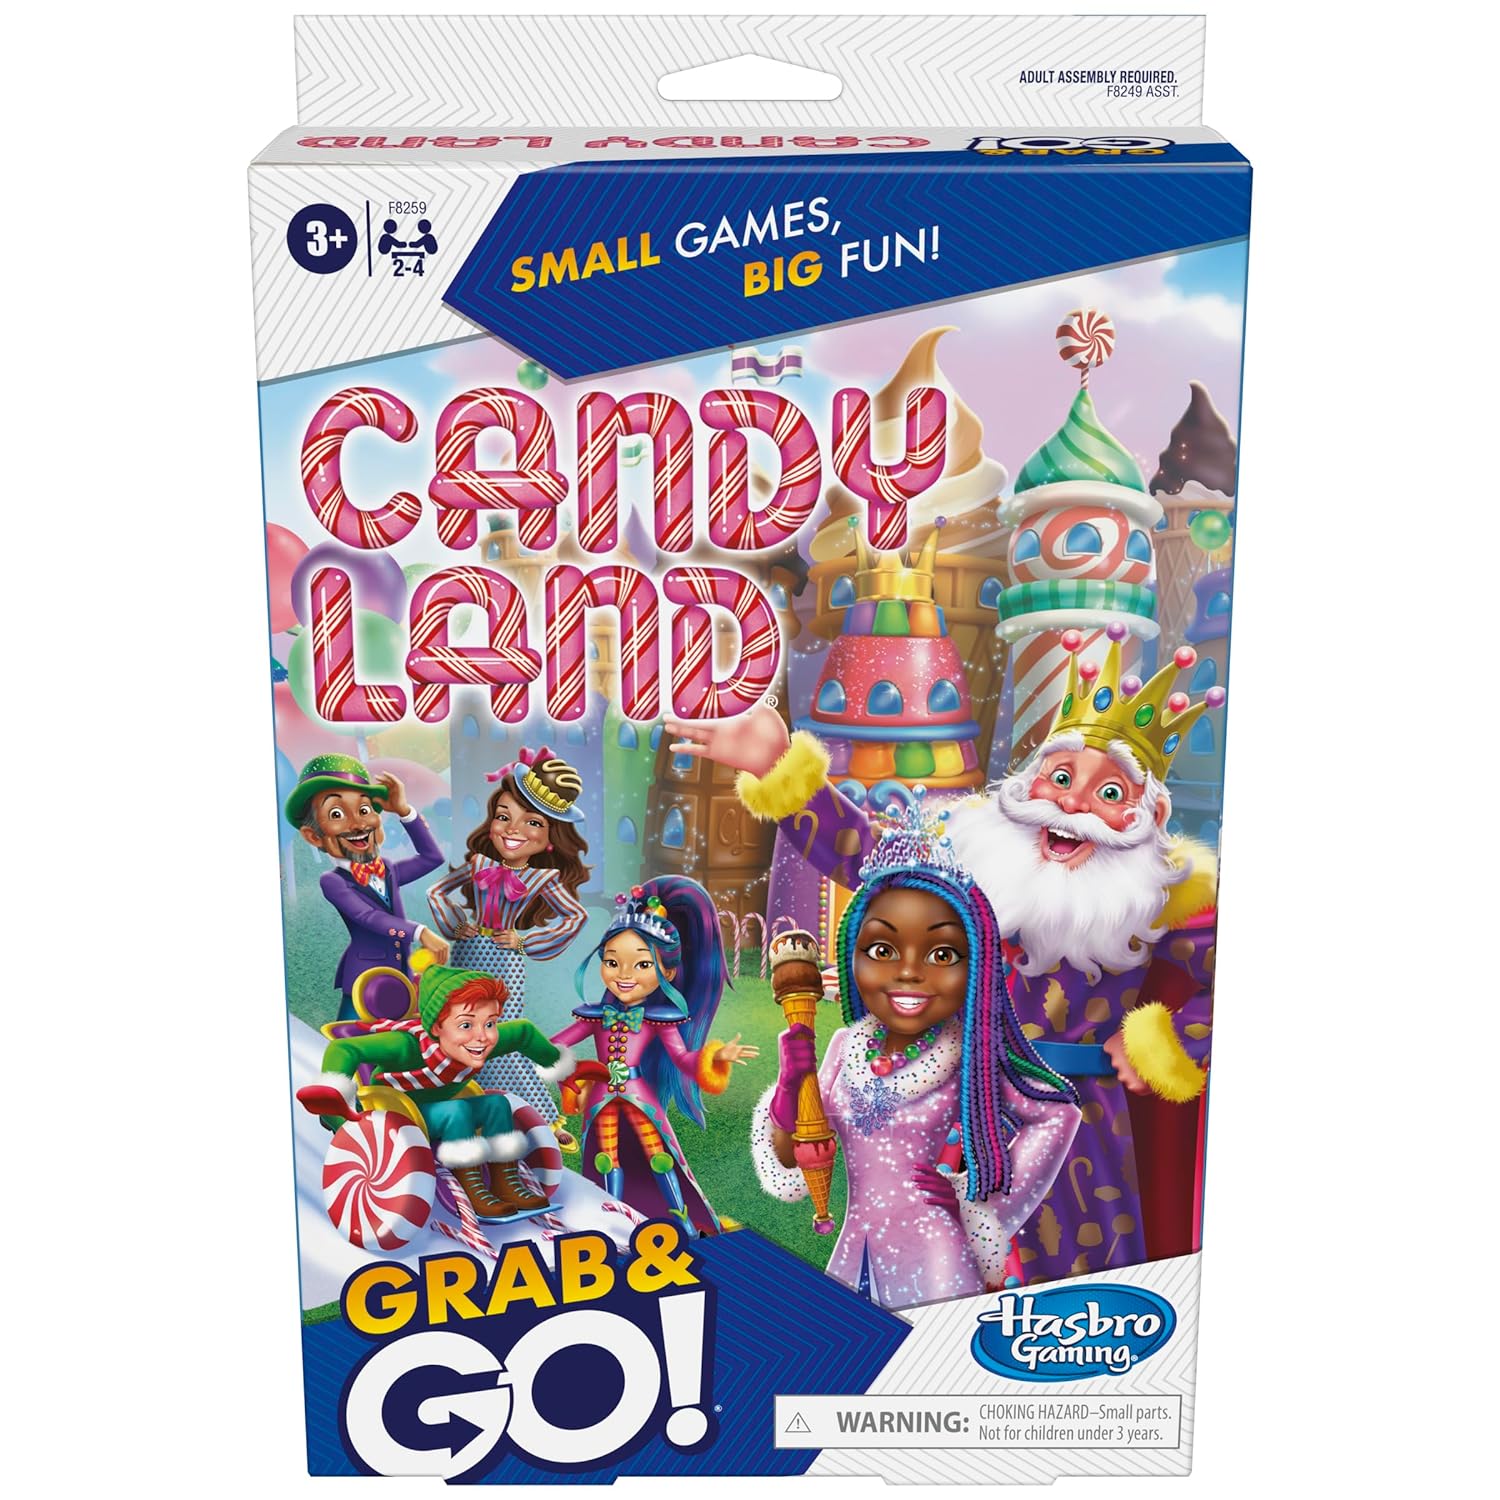 Hasbro Gaming Candyland Grab and Go Portable Travel Game for 2-4 Players Ages 3 and Up